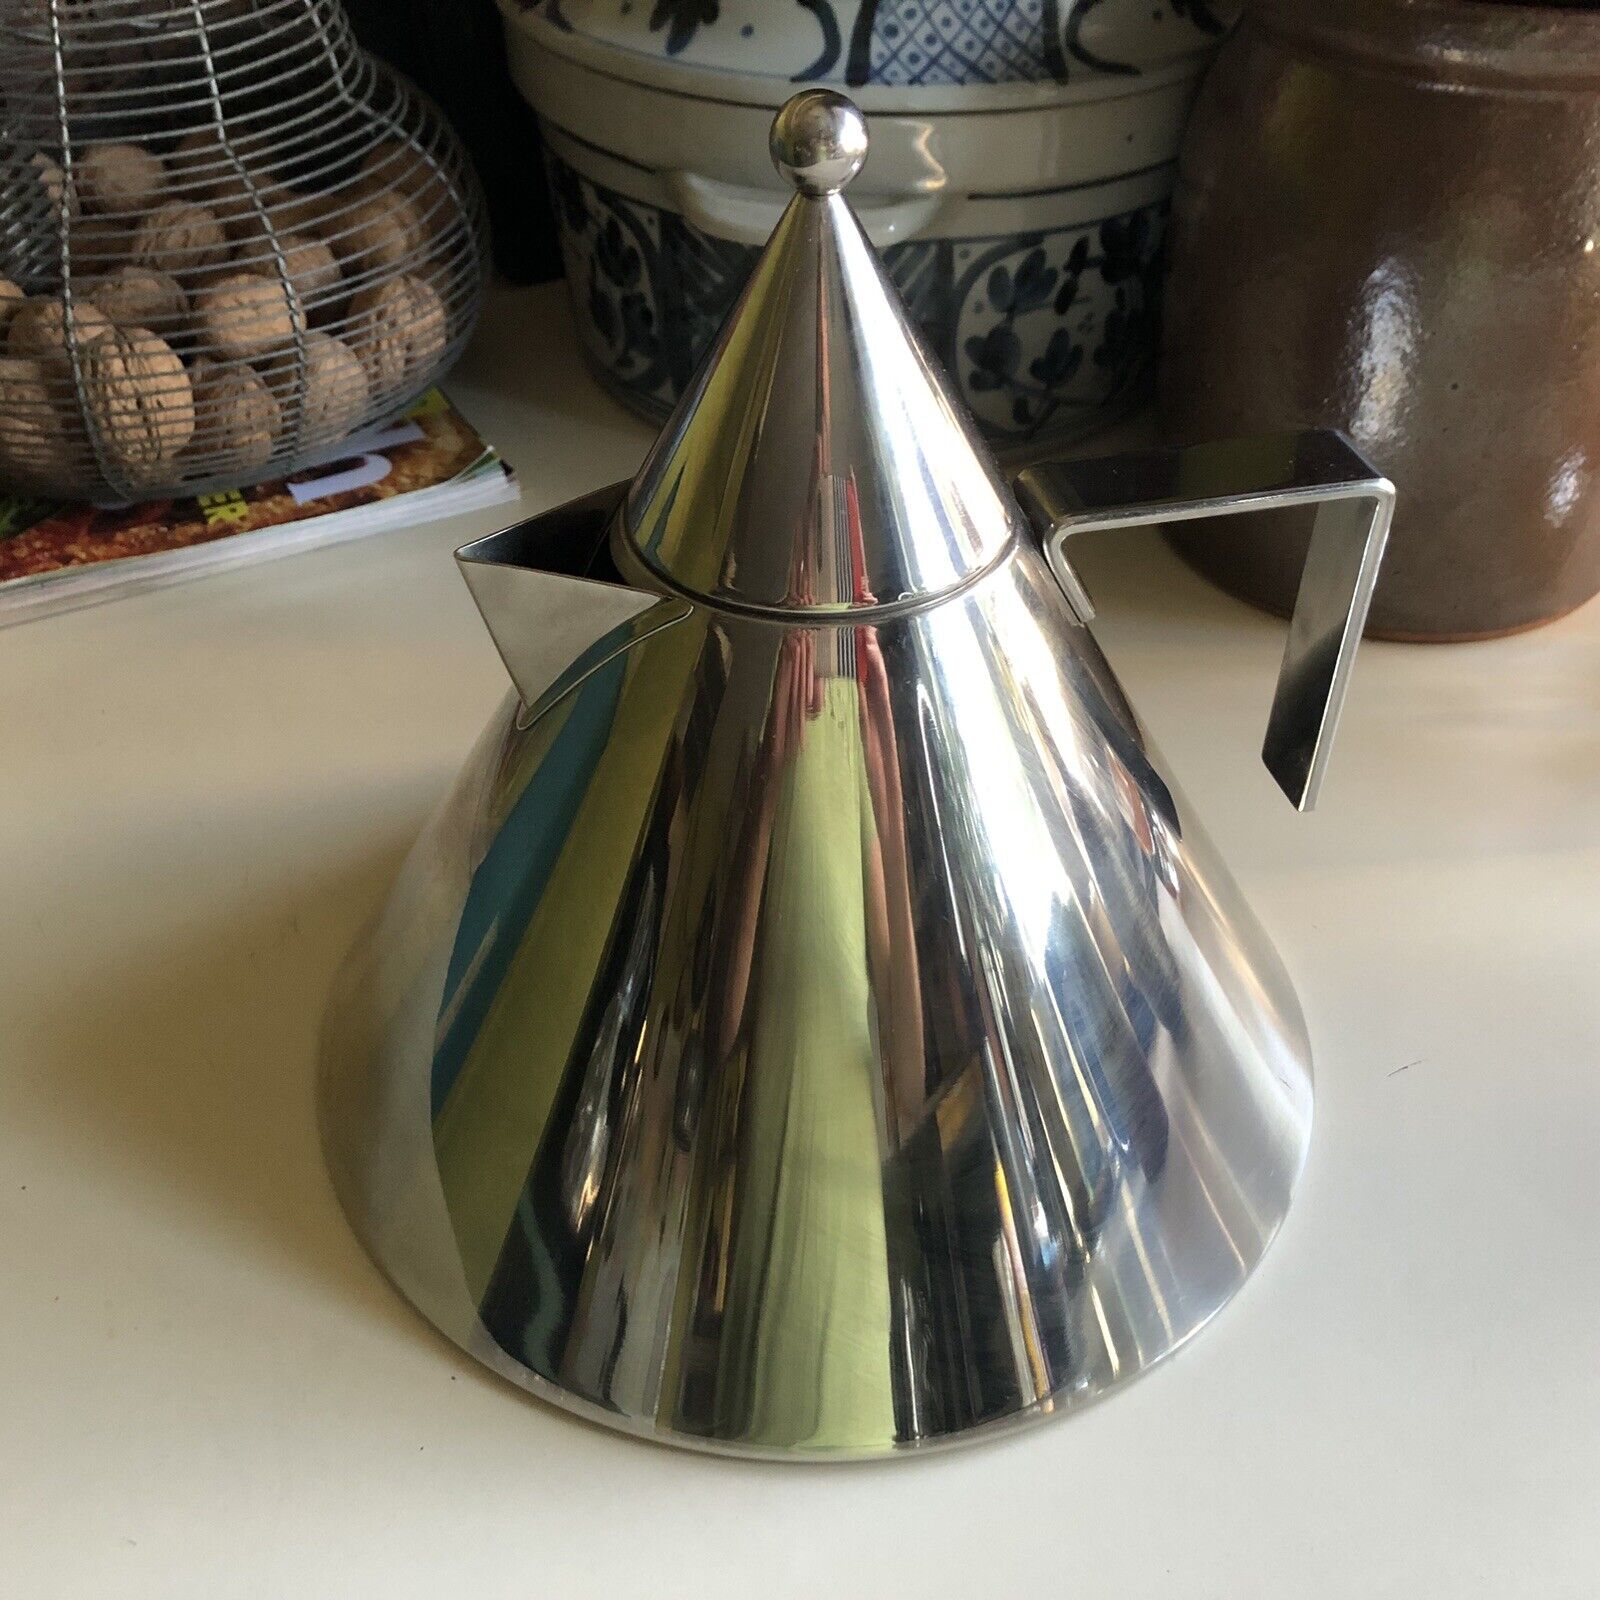 Aldo Rossi for Alessi Conico II Stainless Steel Conical Water Tea Kettle Italy